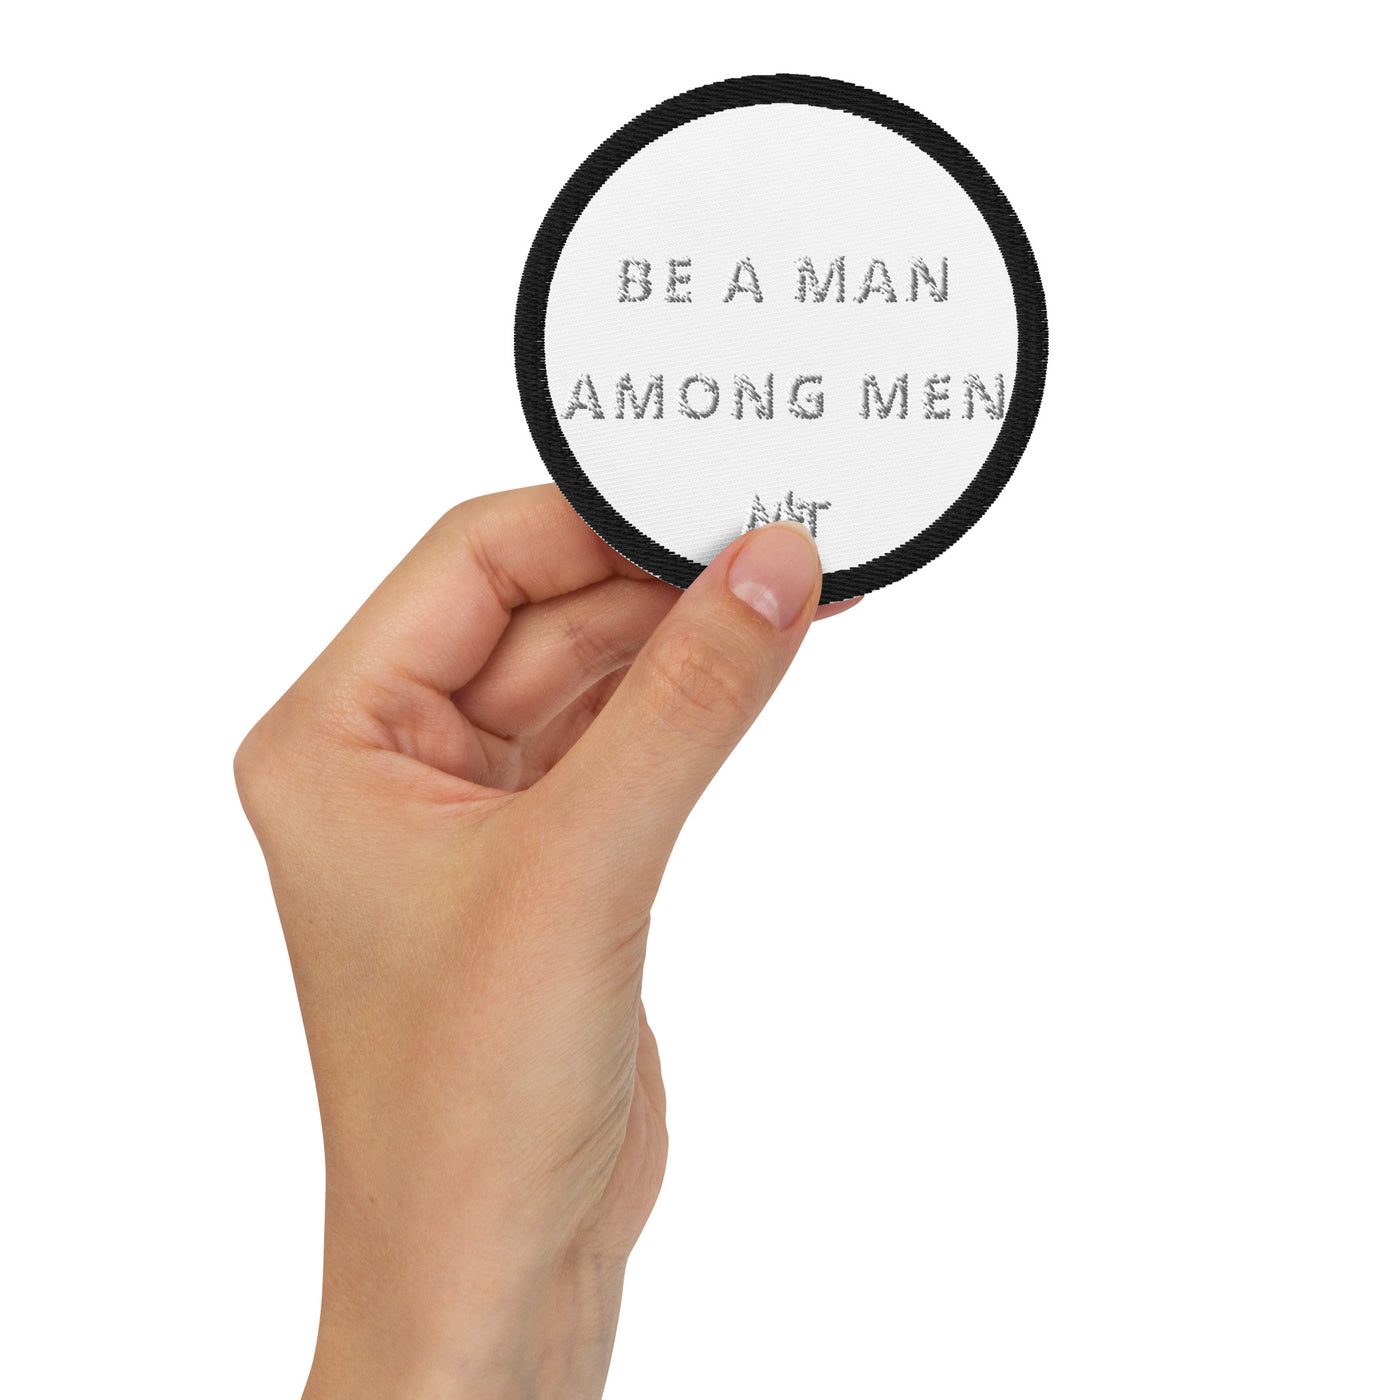 Be a man among men - Embroidered patches